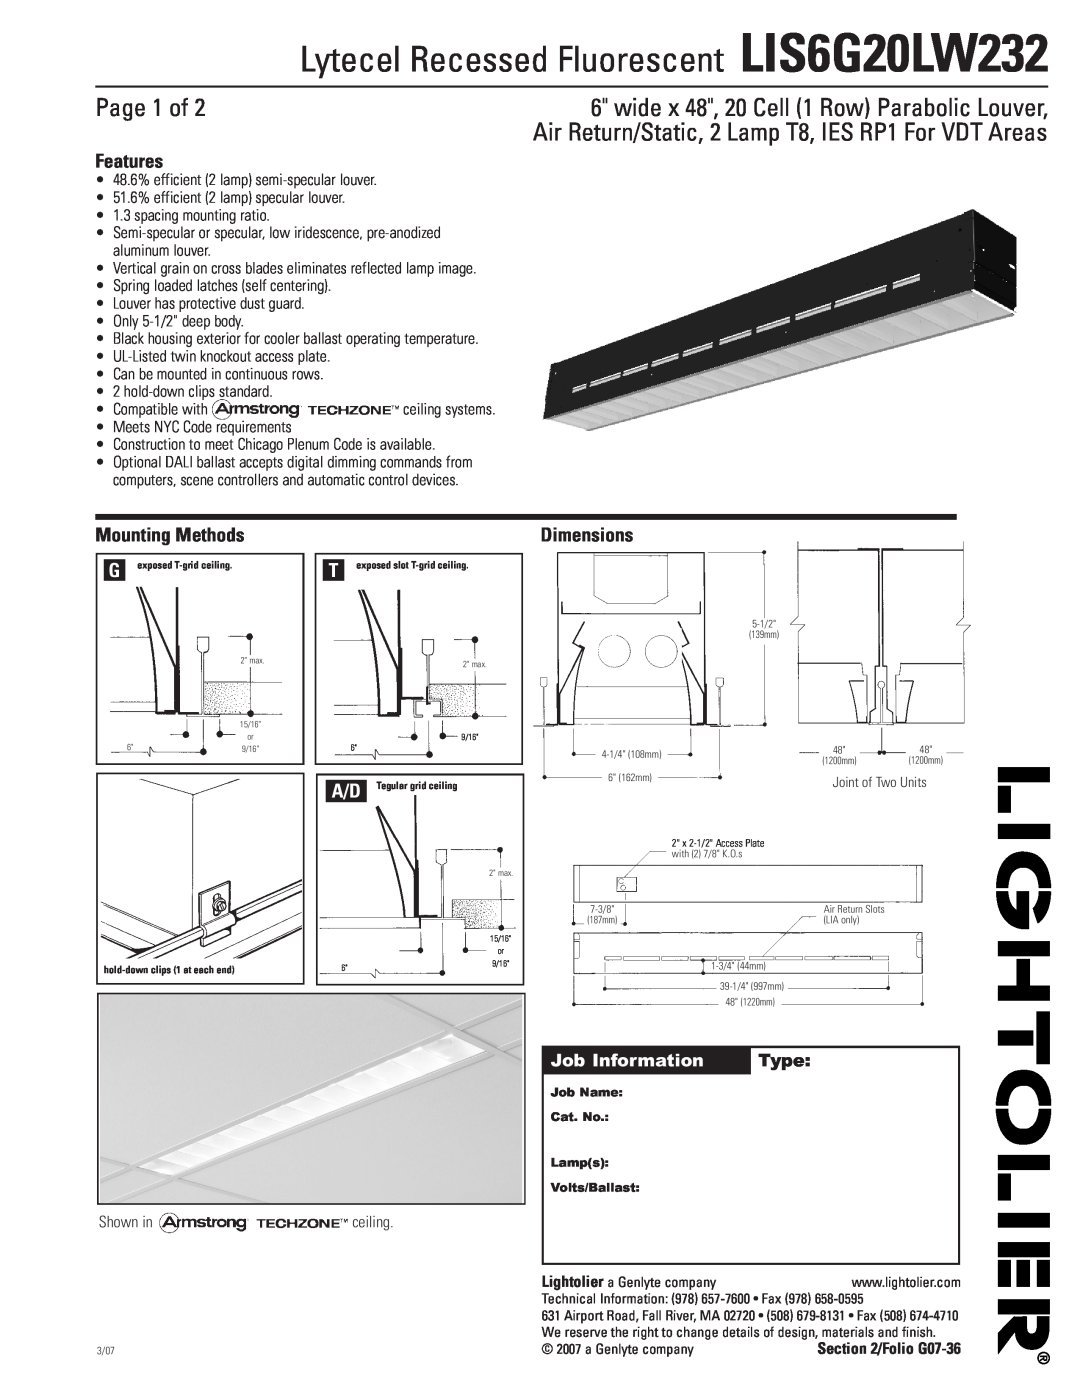 Lightolier dimensions Lytecel Recessed Fluorescent LIS6G20LW232, Page 1 of, Features, Mounting Methods, Dimensions 